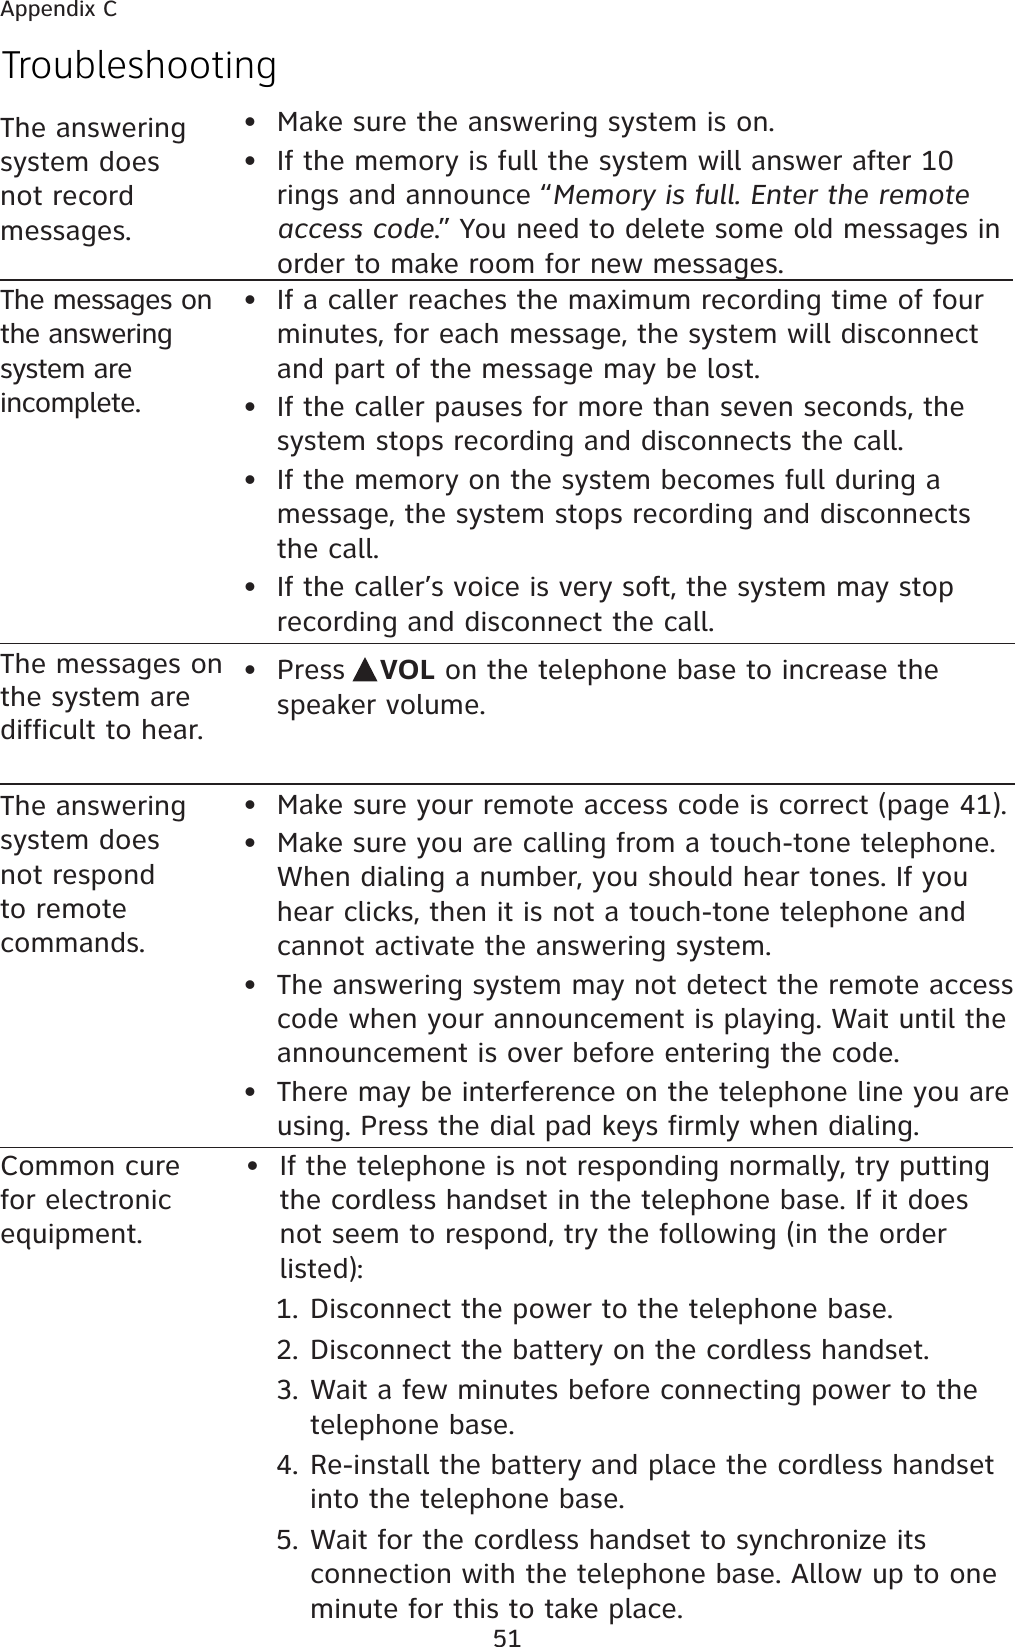 51TroubleshootingThe answering system does not respond to remote commands.•  Make sure your remote access code is correct (page 41).•  Make sure you are calling from a touch-tone telephone. When dialing a number, you should hear tones. If you hear clicks, then it is not a touch-tone telephone and cannot activate the answering system.•  The answering system may not detect the remote access code when your announcement is playing. Wait until the announcement is over before entering the code.•  There may be interference on the telephone line you are using. Press the dial pad keys firmly when dialing.The answering system does not record messages.•  Make sure the answering system is on.•  If the memory is full the system will answer after 10 rings and announce “Memory is full. Enter the remote access code.” You need to delete some old messages in order to make room for new messages.The messages on the answering system are incomplete.•  If a caller reaches the maximum recording time of four minutes, for each message, the system will disconnect and part of the message may be lost. •  If the caller pauses for more than seven seconds, the system stops recording and disconnects the call.•  If the memory on the system becomes full during a message, the system stops recording and disconnects the call.•  If the caller’s voice is very soft, the system may stop recording and disconnect the call.The messages on the system are difficult to hear.• Press  VOL on the telephone base to increase the speaker volume.•  If the telephone is not responding normally, try putting the cordless handset in the telephone base. If it does not seem to respond, try the following (in the order listed):1. Disconnect the power to the telephone base.2. Disconnect the battery on the cordless handset.3. Wait a few minutes before connecting power to the telephone base.4. Re-install the battery and place the cordless handset into the telephone base.5. Wait for the cordless handset to synchronize its connection with the telephone base. Allow up to one minute for this to take place.Common cure for electronic equipment.Appendix C